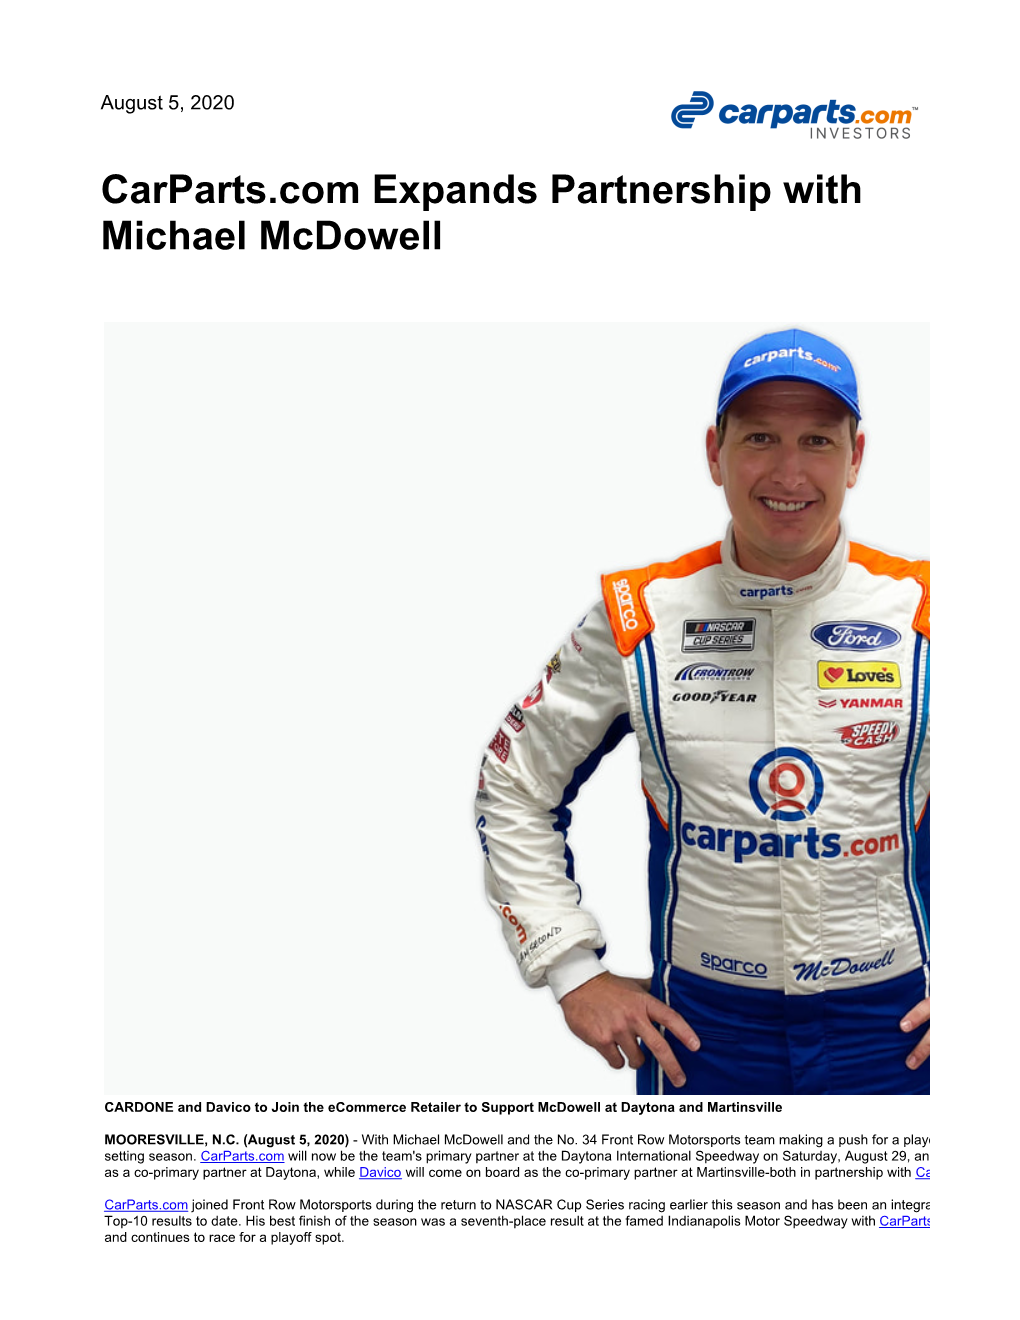 Carparts.Com Expands Partnership with Michael Mcdowell